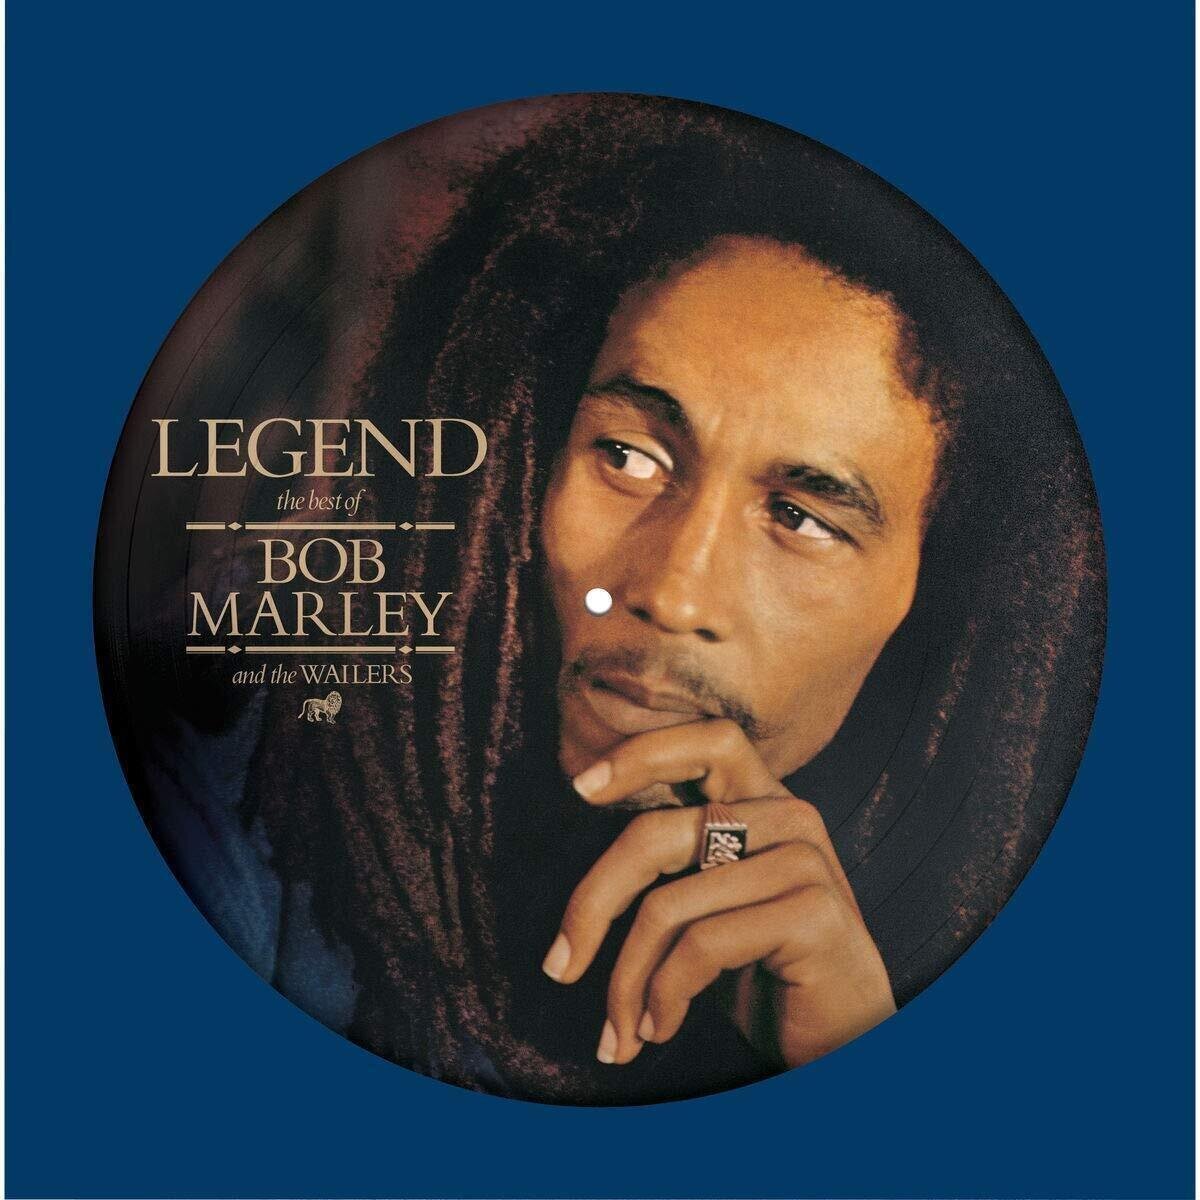 Bob Marley & The Wailers - Legend (Picture Disc) (LP) Bob Marley & The Wailers